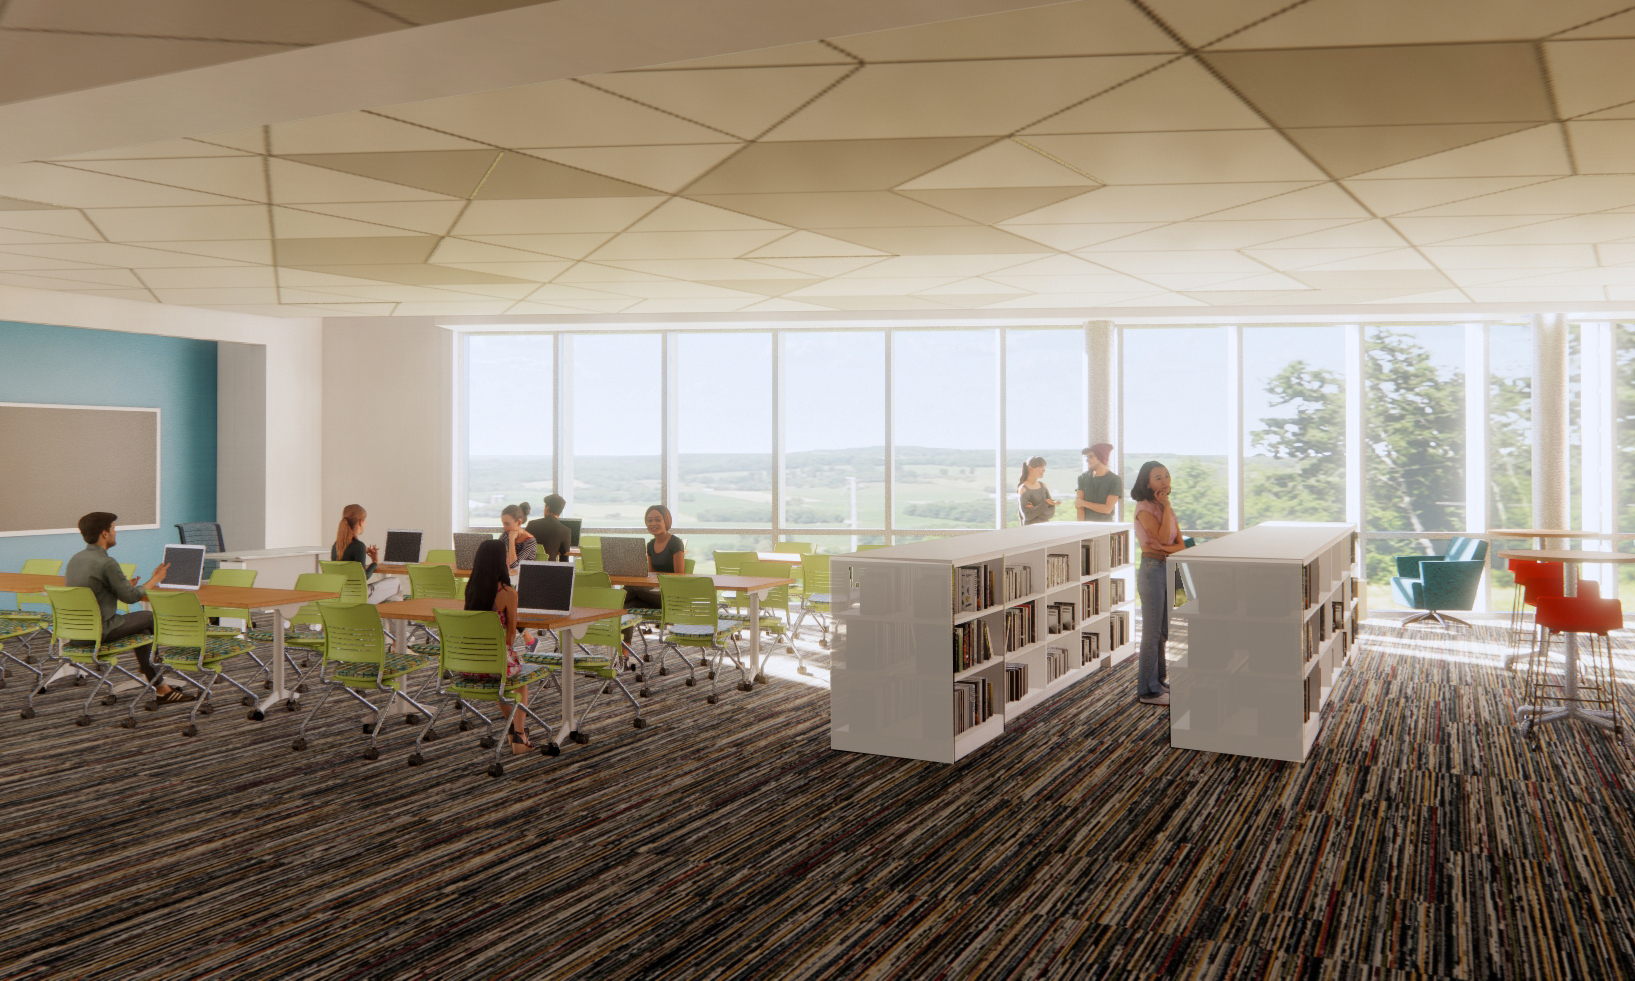 <p>The interior spaces will foster hands-on learning, creating, and discovering to pave the way for a prepared workforce or students of higher education.</p>
